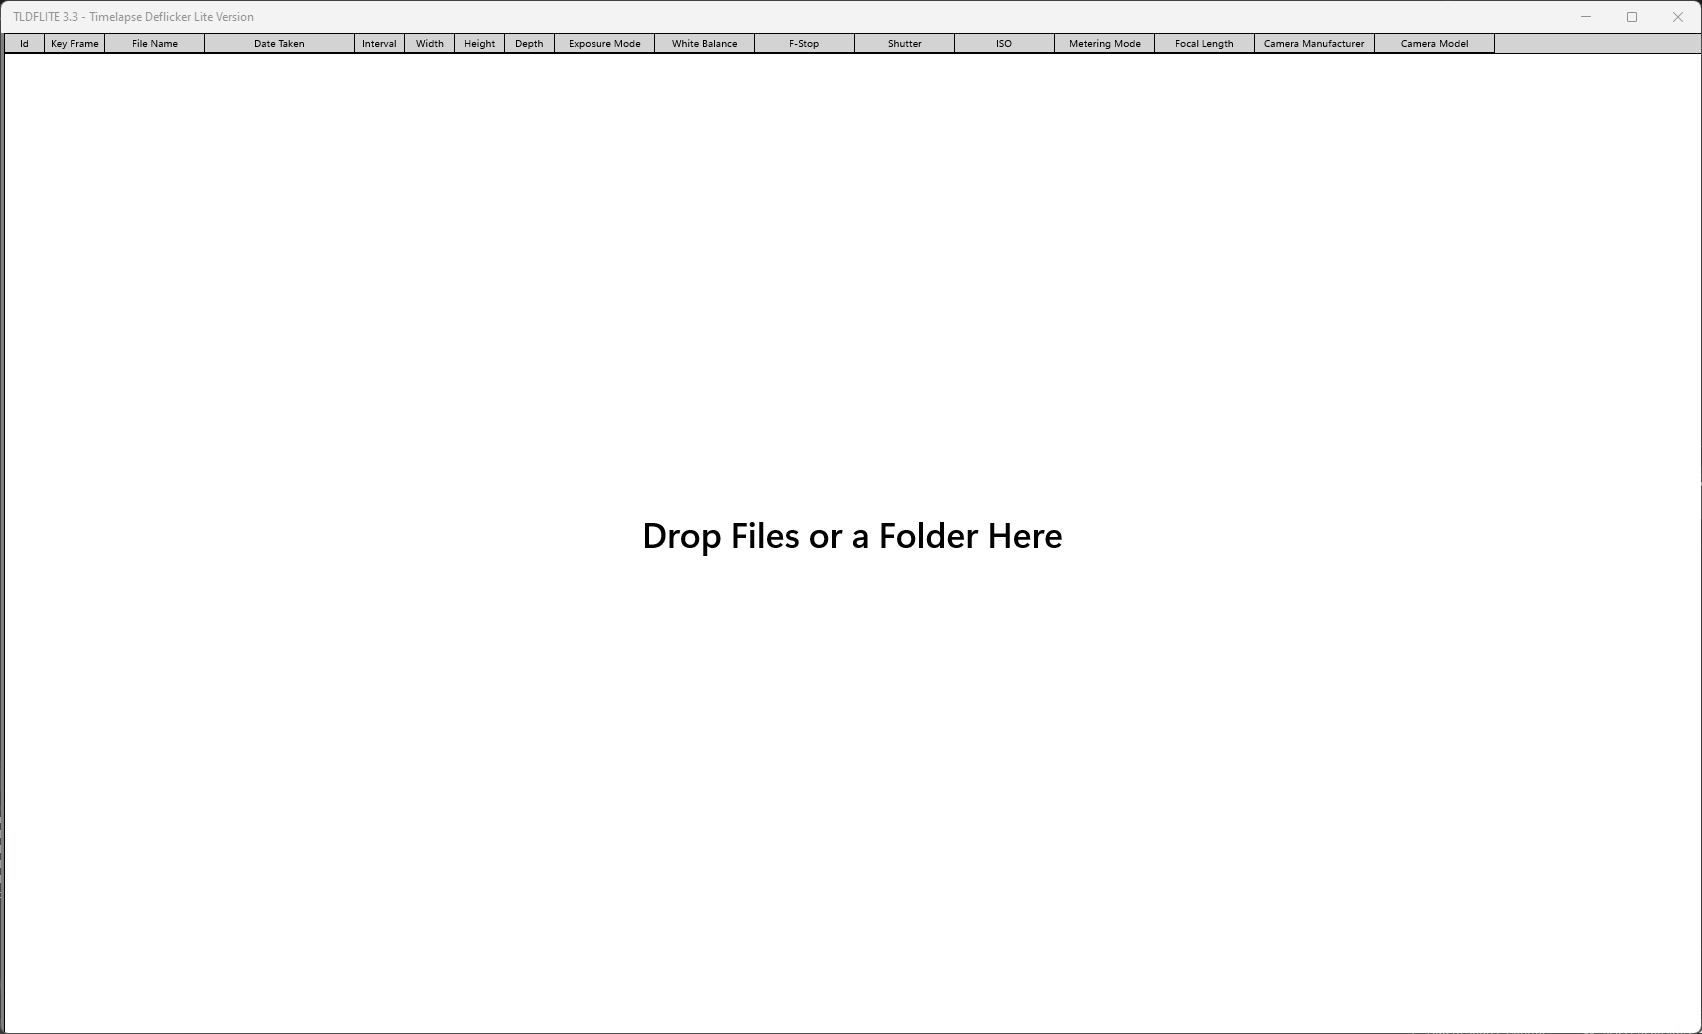 First Window. Drag and Drop Files and a Folder into this Window.